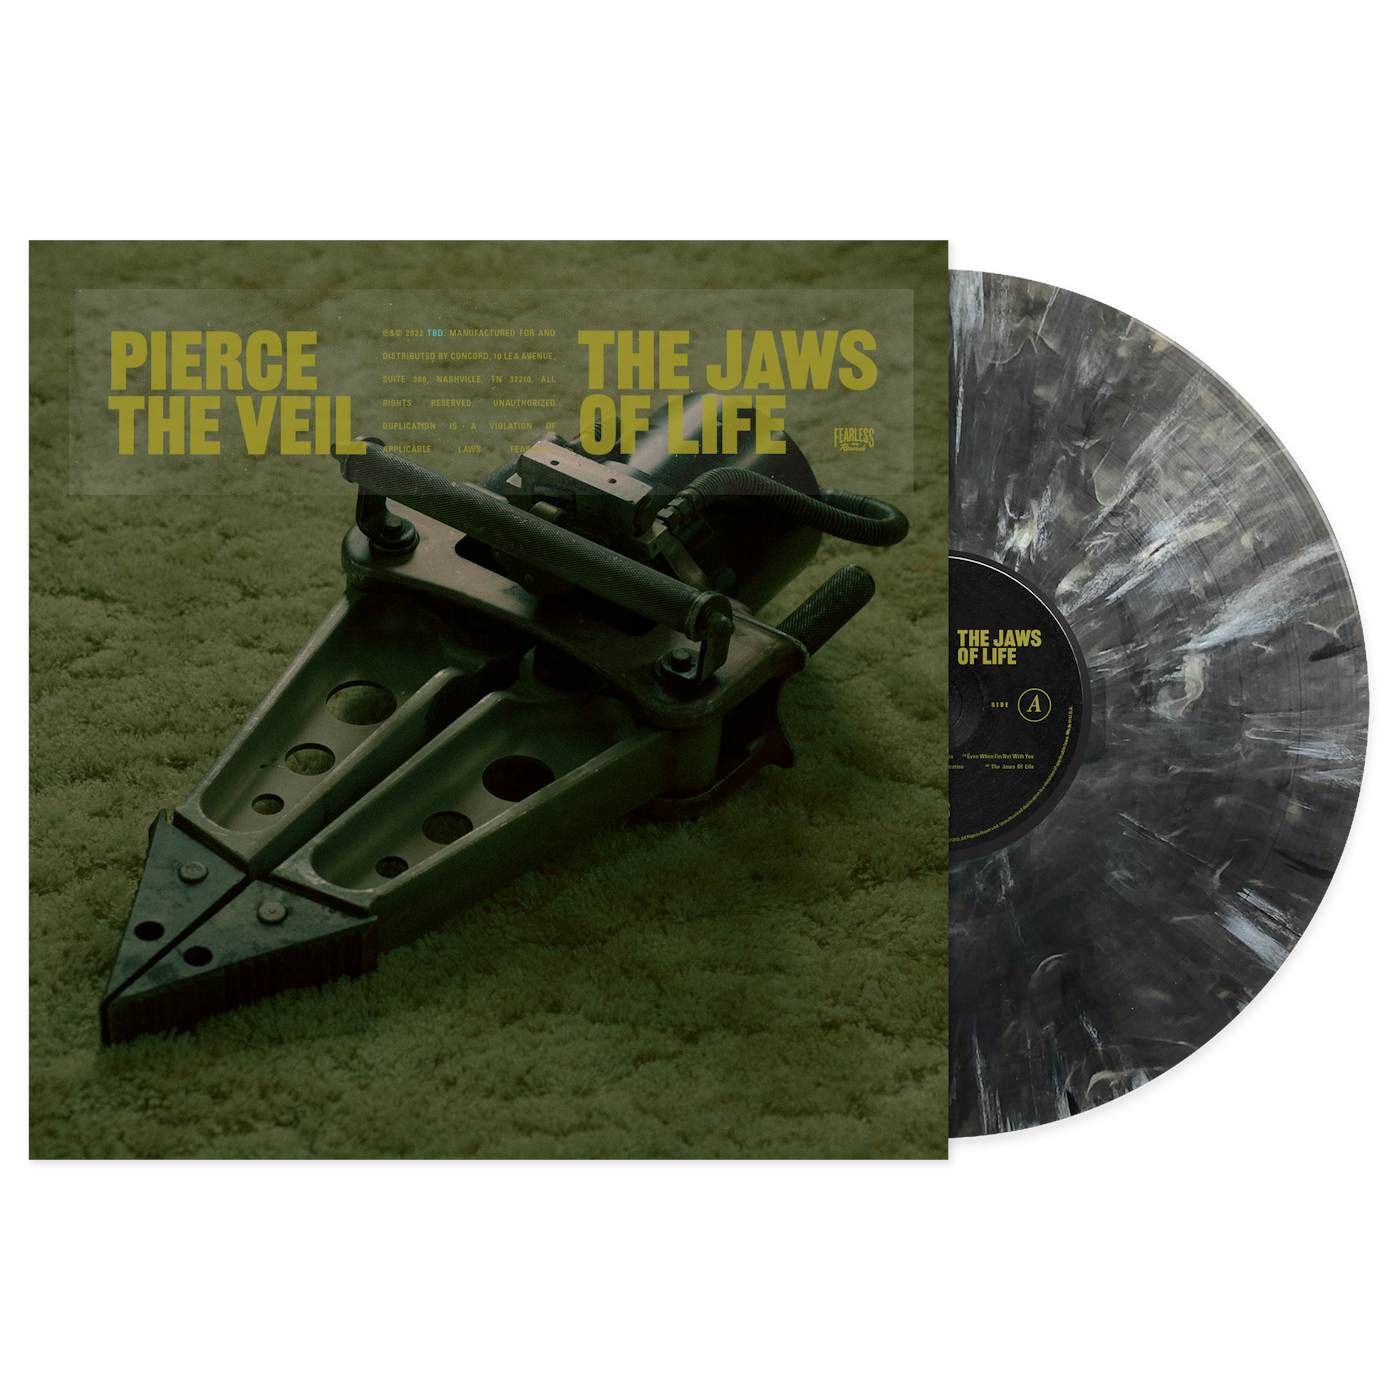 Pierce The Veil "The Jaws Of Life" Black And White Marble Vinyl